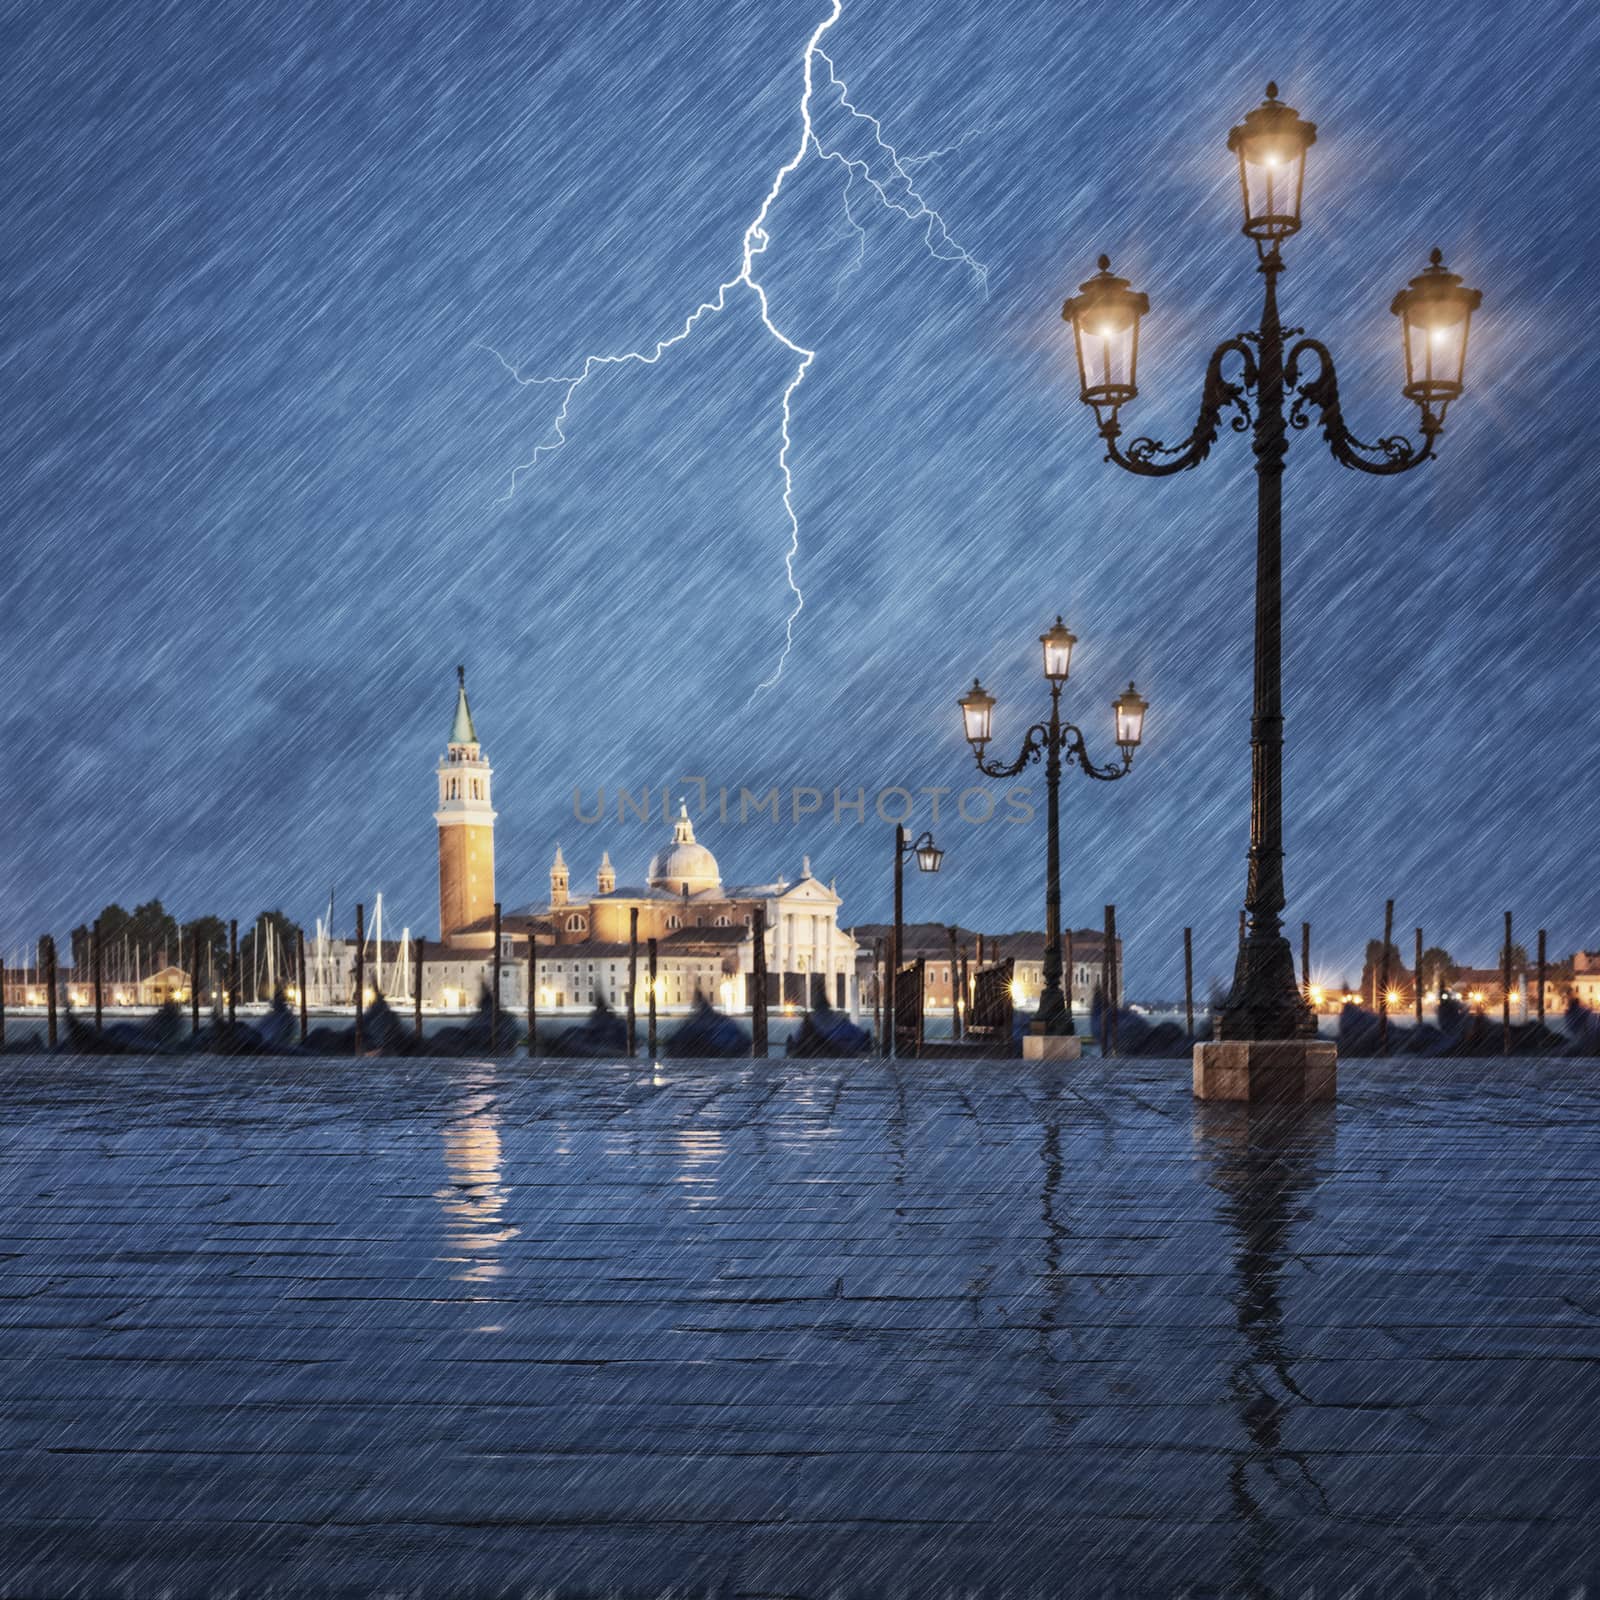 Thunderstorm with lightning in the sky on the Grand Canal, Italy 